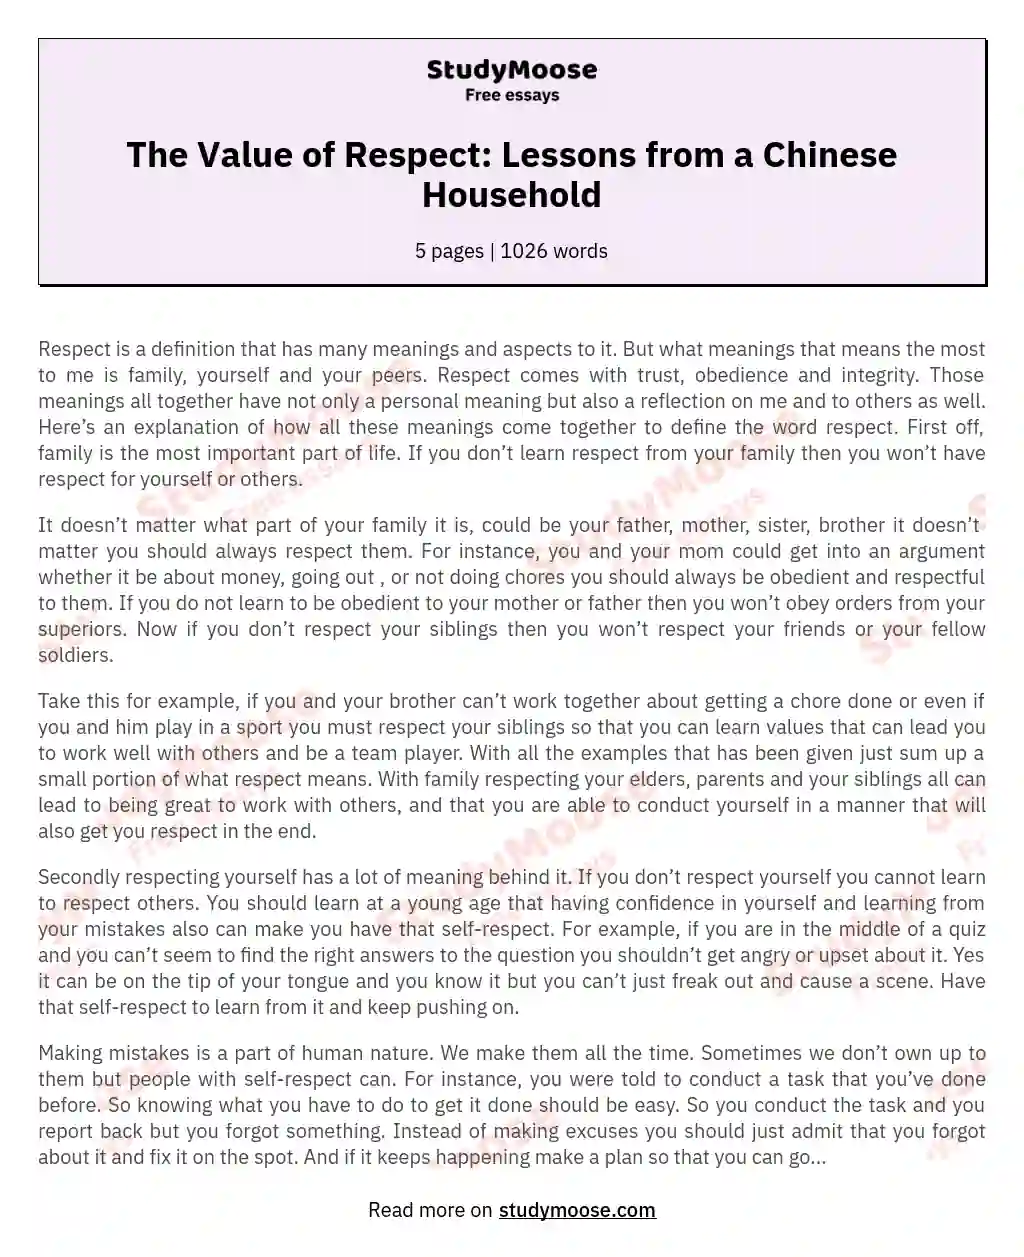 The Value of Respect: Lessons from a Chinese Household essay